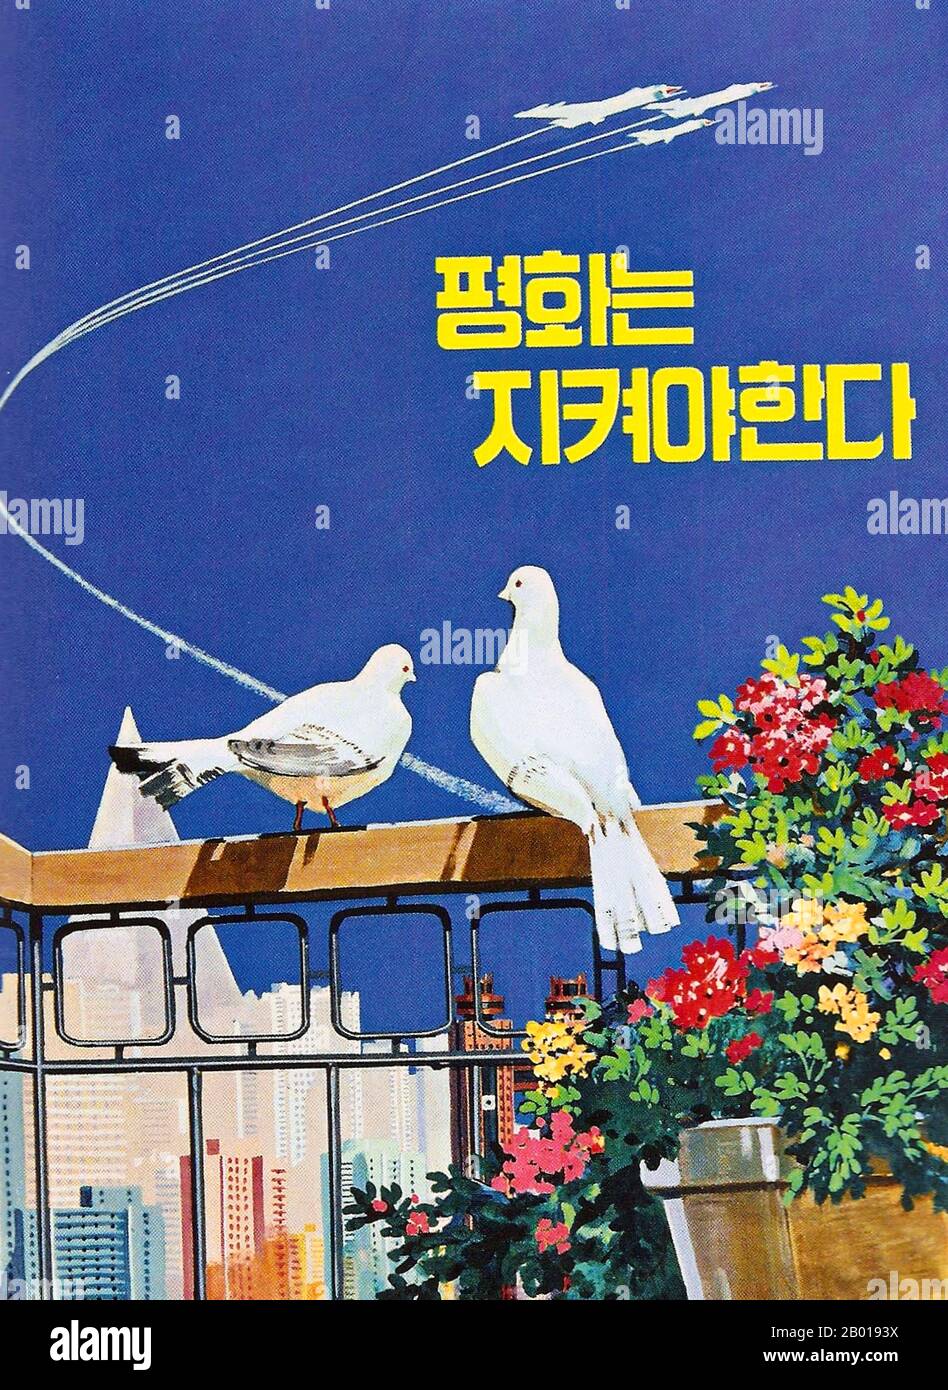 Korea: North Korean (DPRK) propaganda poster - 'Peace has to be defended', set against the Pyongyang skyline, c. 1950s-1960s.  Socialist Realism is a style of realistic art which developed under Socialism in the Soviet Union and became a dominant style in other communist countries. Socialist Realism is a teleologically-oriented style having as its purpose the furtherance of the goals of socialism and communism. Although related, it should not be confused with Social Realism, a type of art that realistically depicts subjects of social concern. Stock Photo